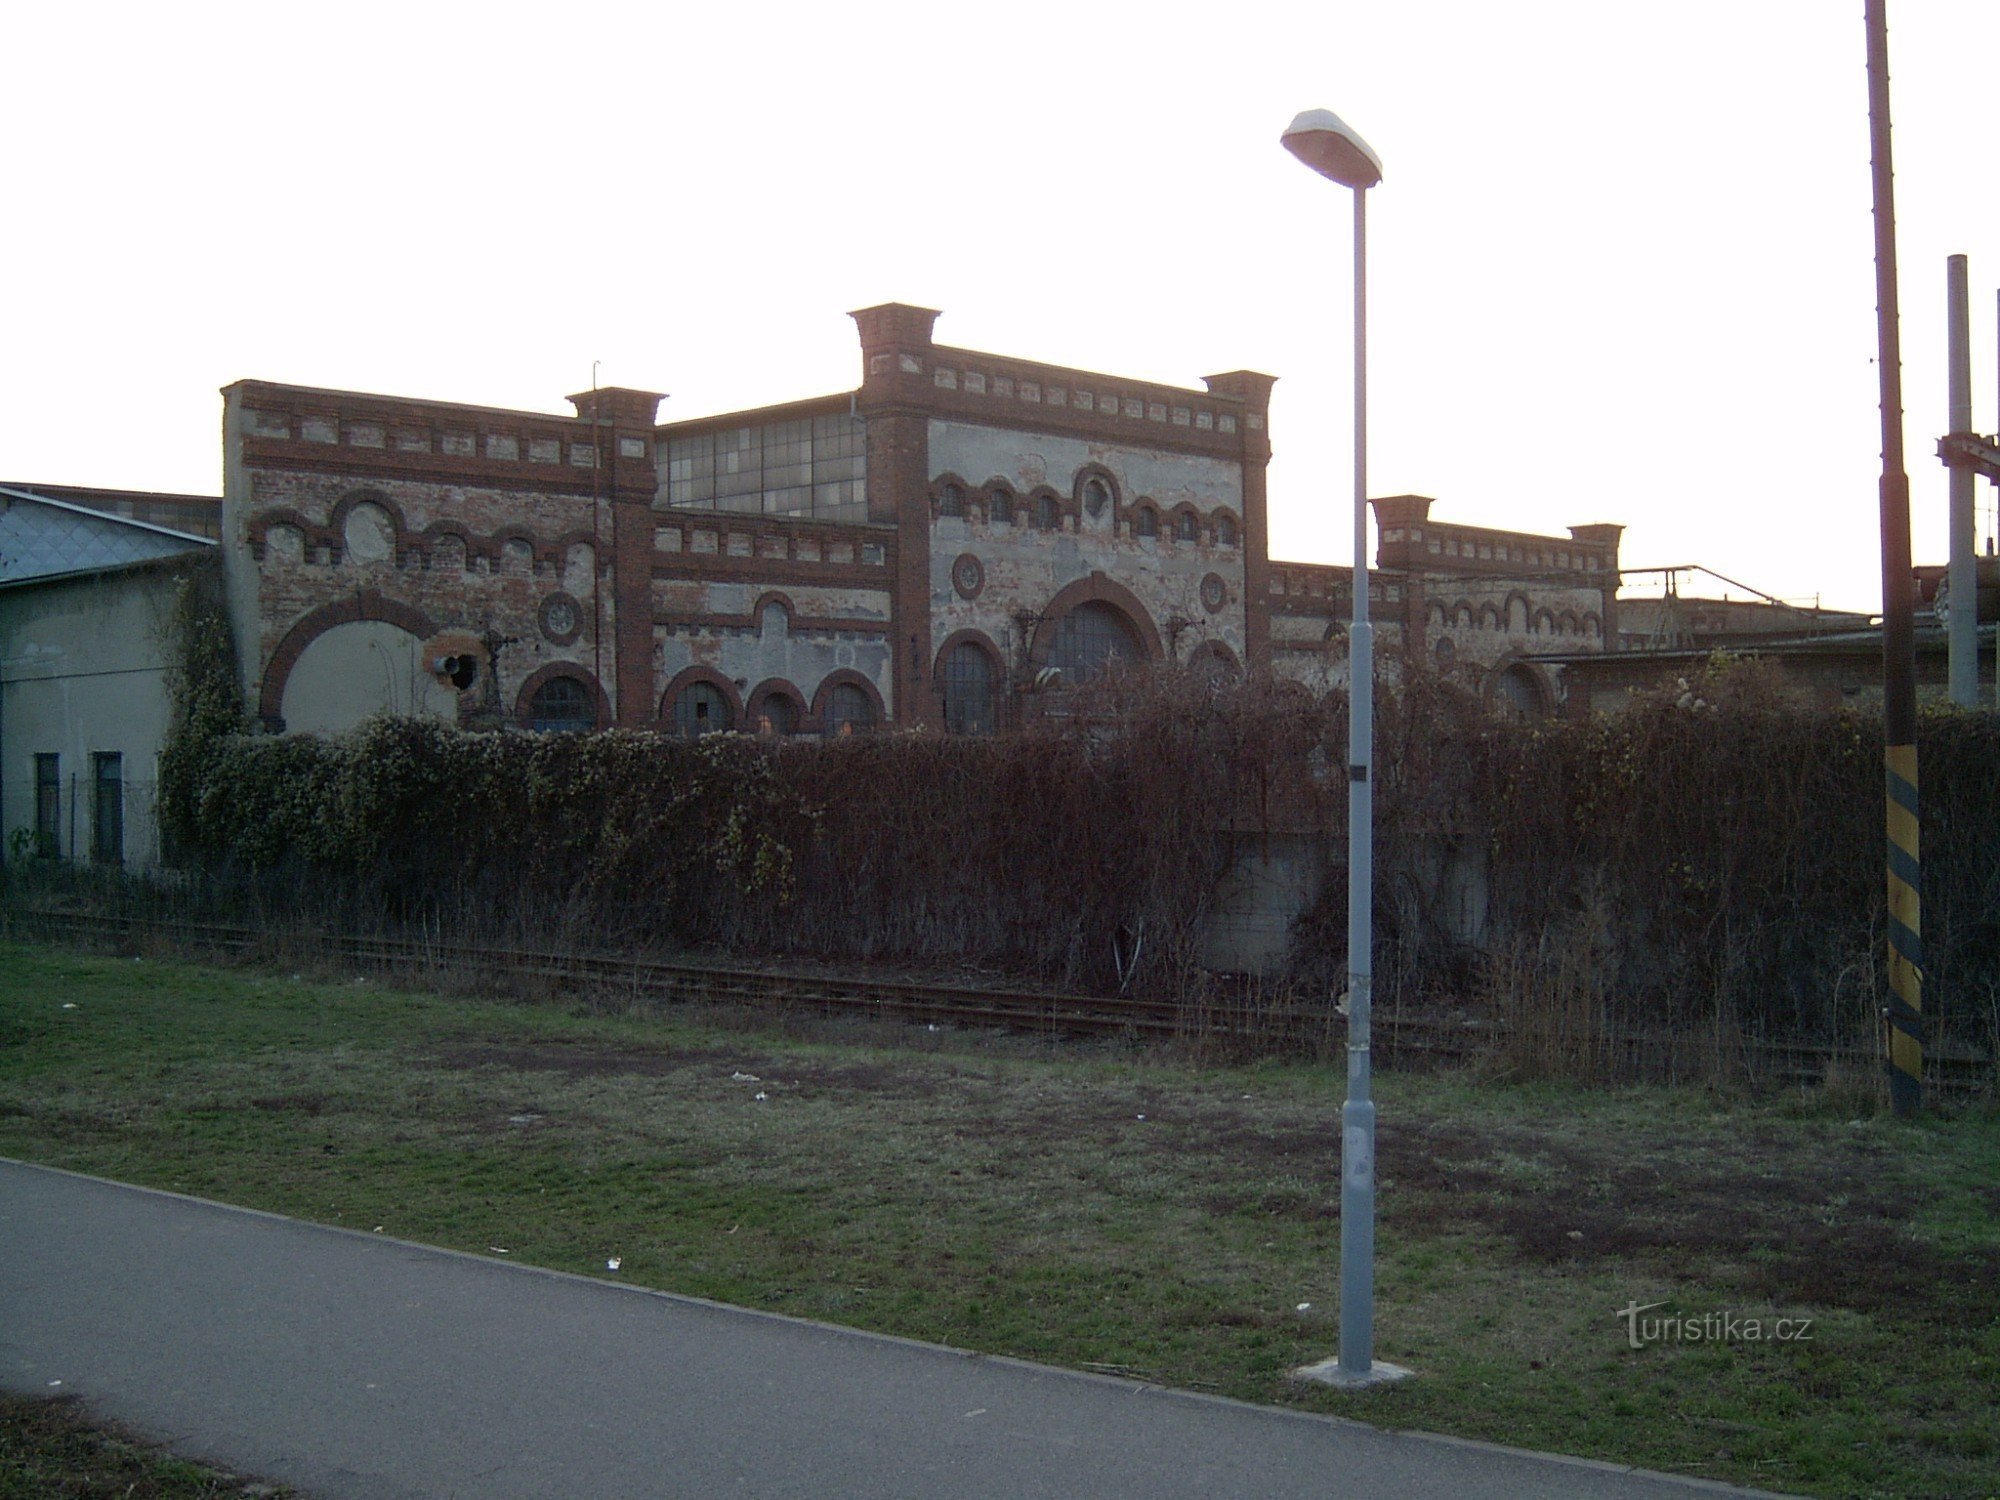 view of the slaughterhouse from the bike path by the Svitava river